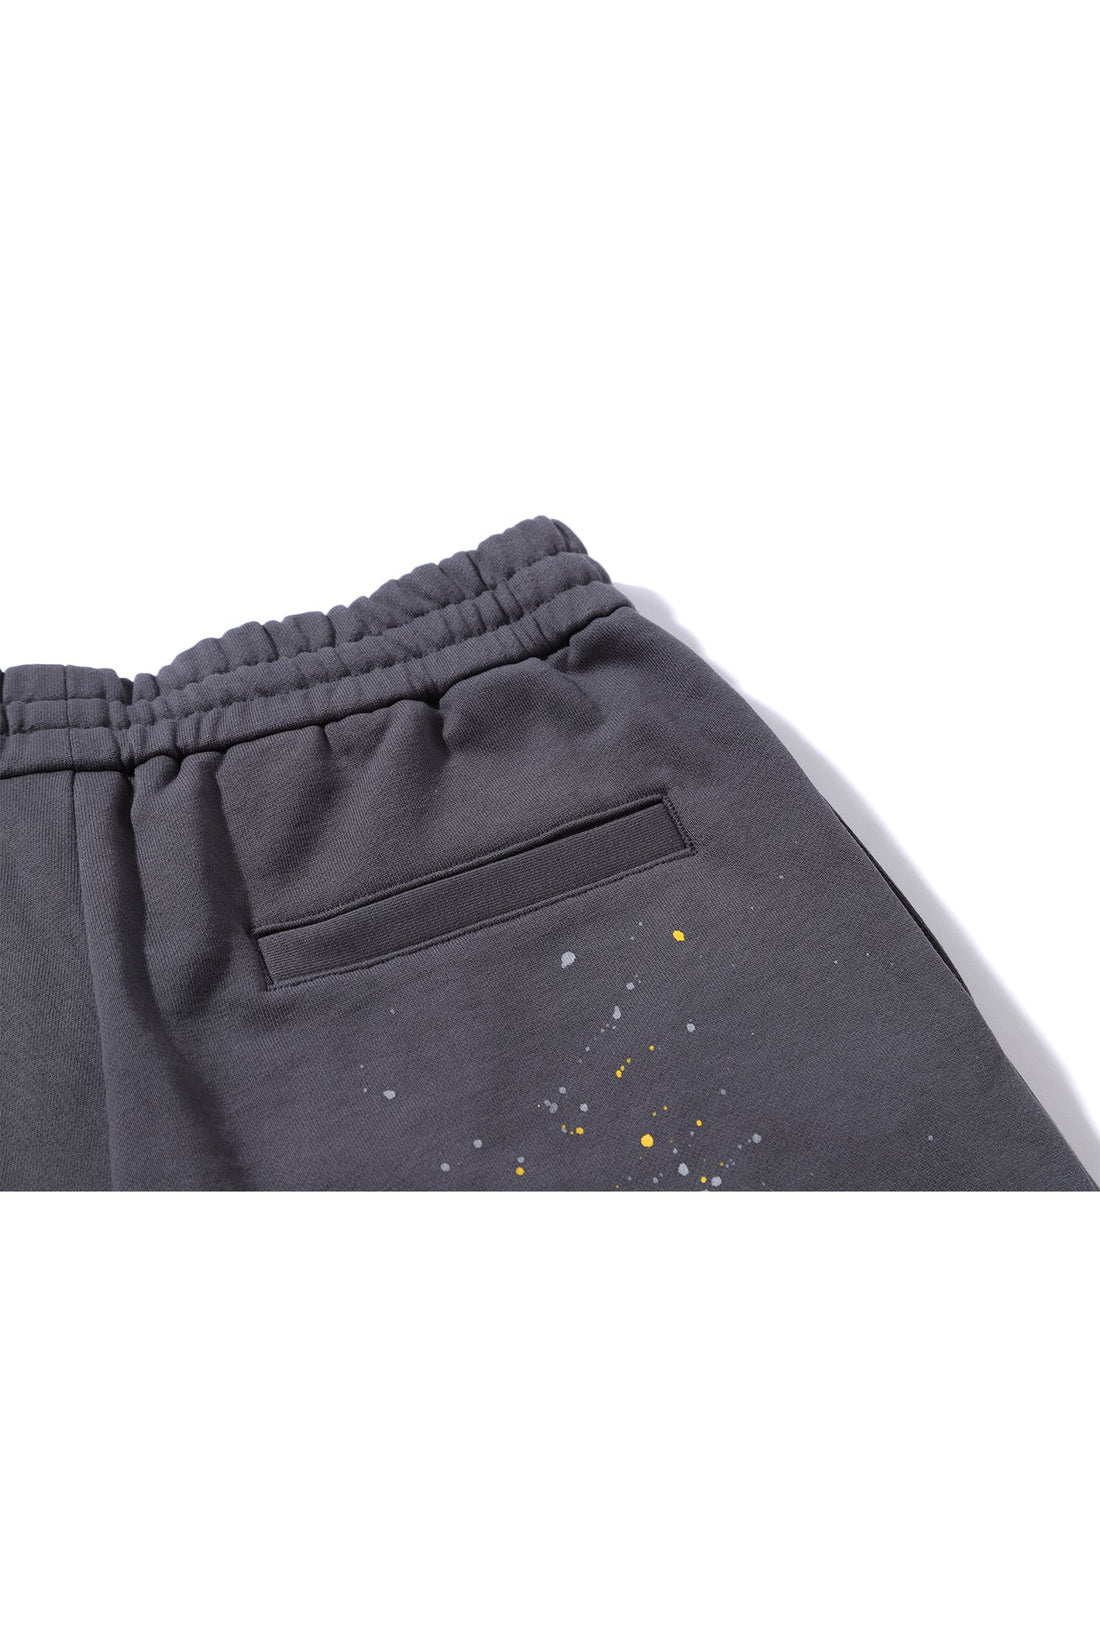 POLKA DOTS PANTS GREY Acupuncture